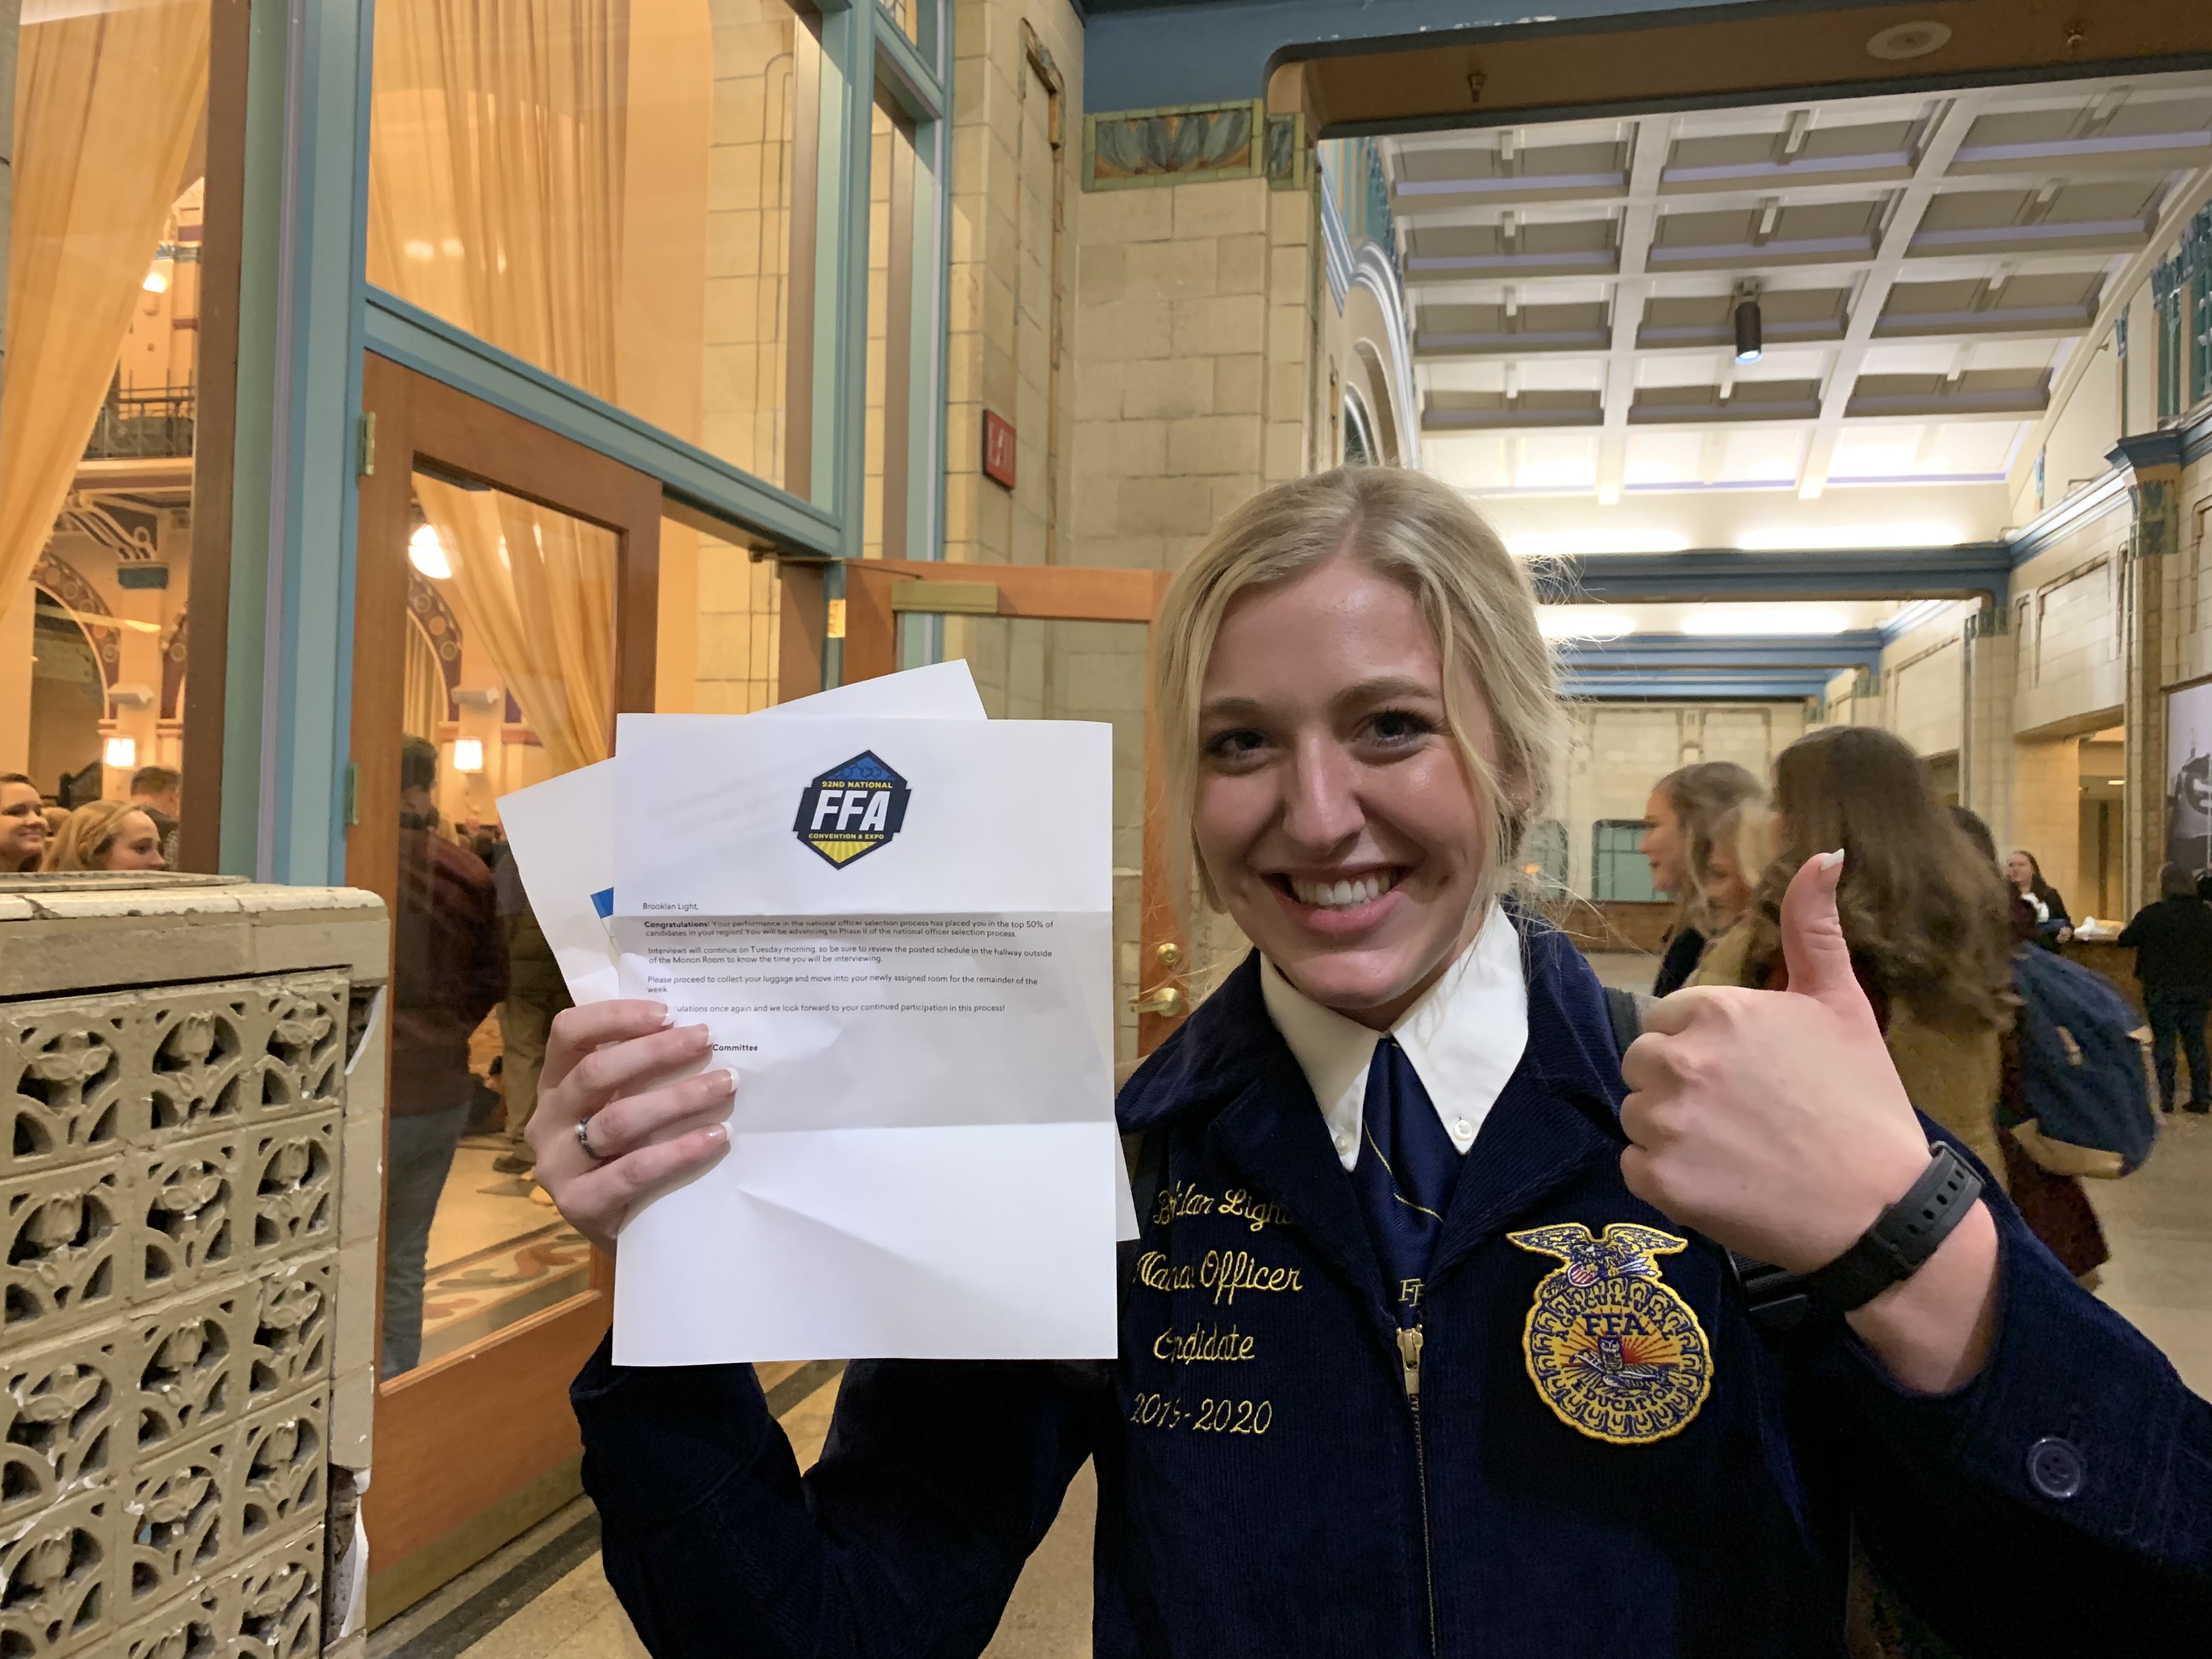 Brooklan Light of Garber Advances to Phase Two of the National FFA Officer Selection Process in Indy